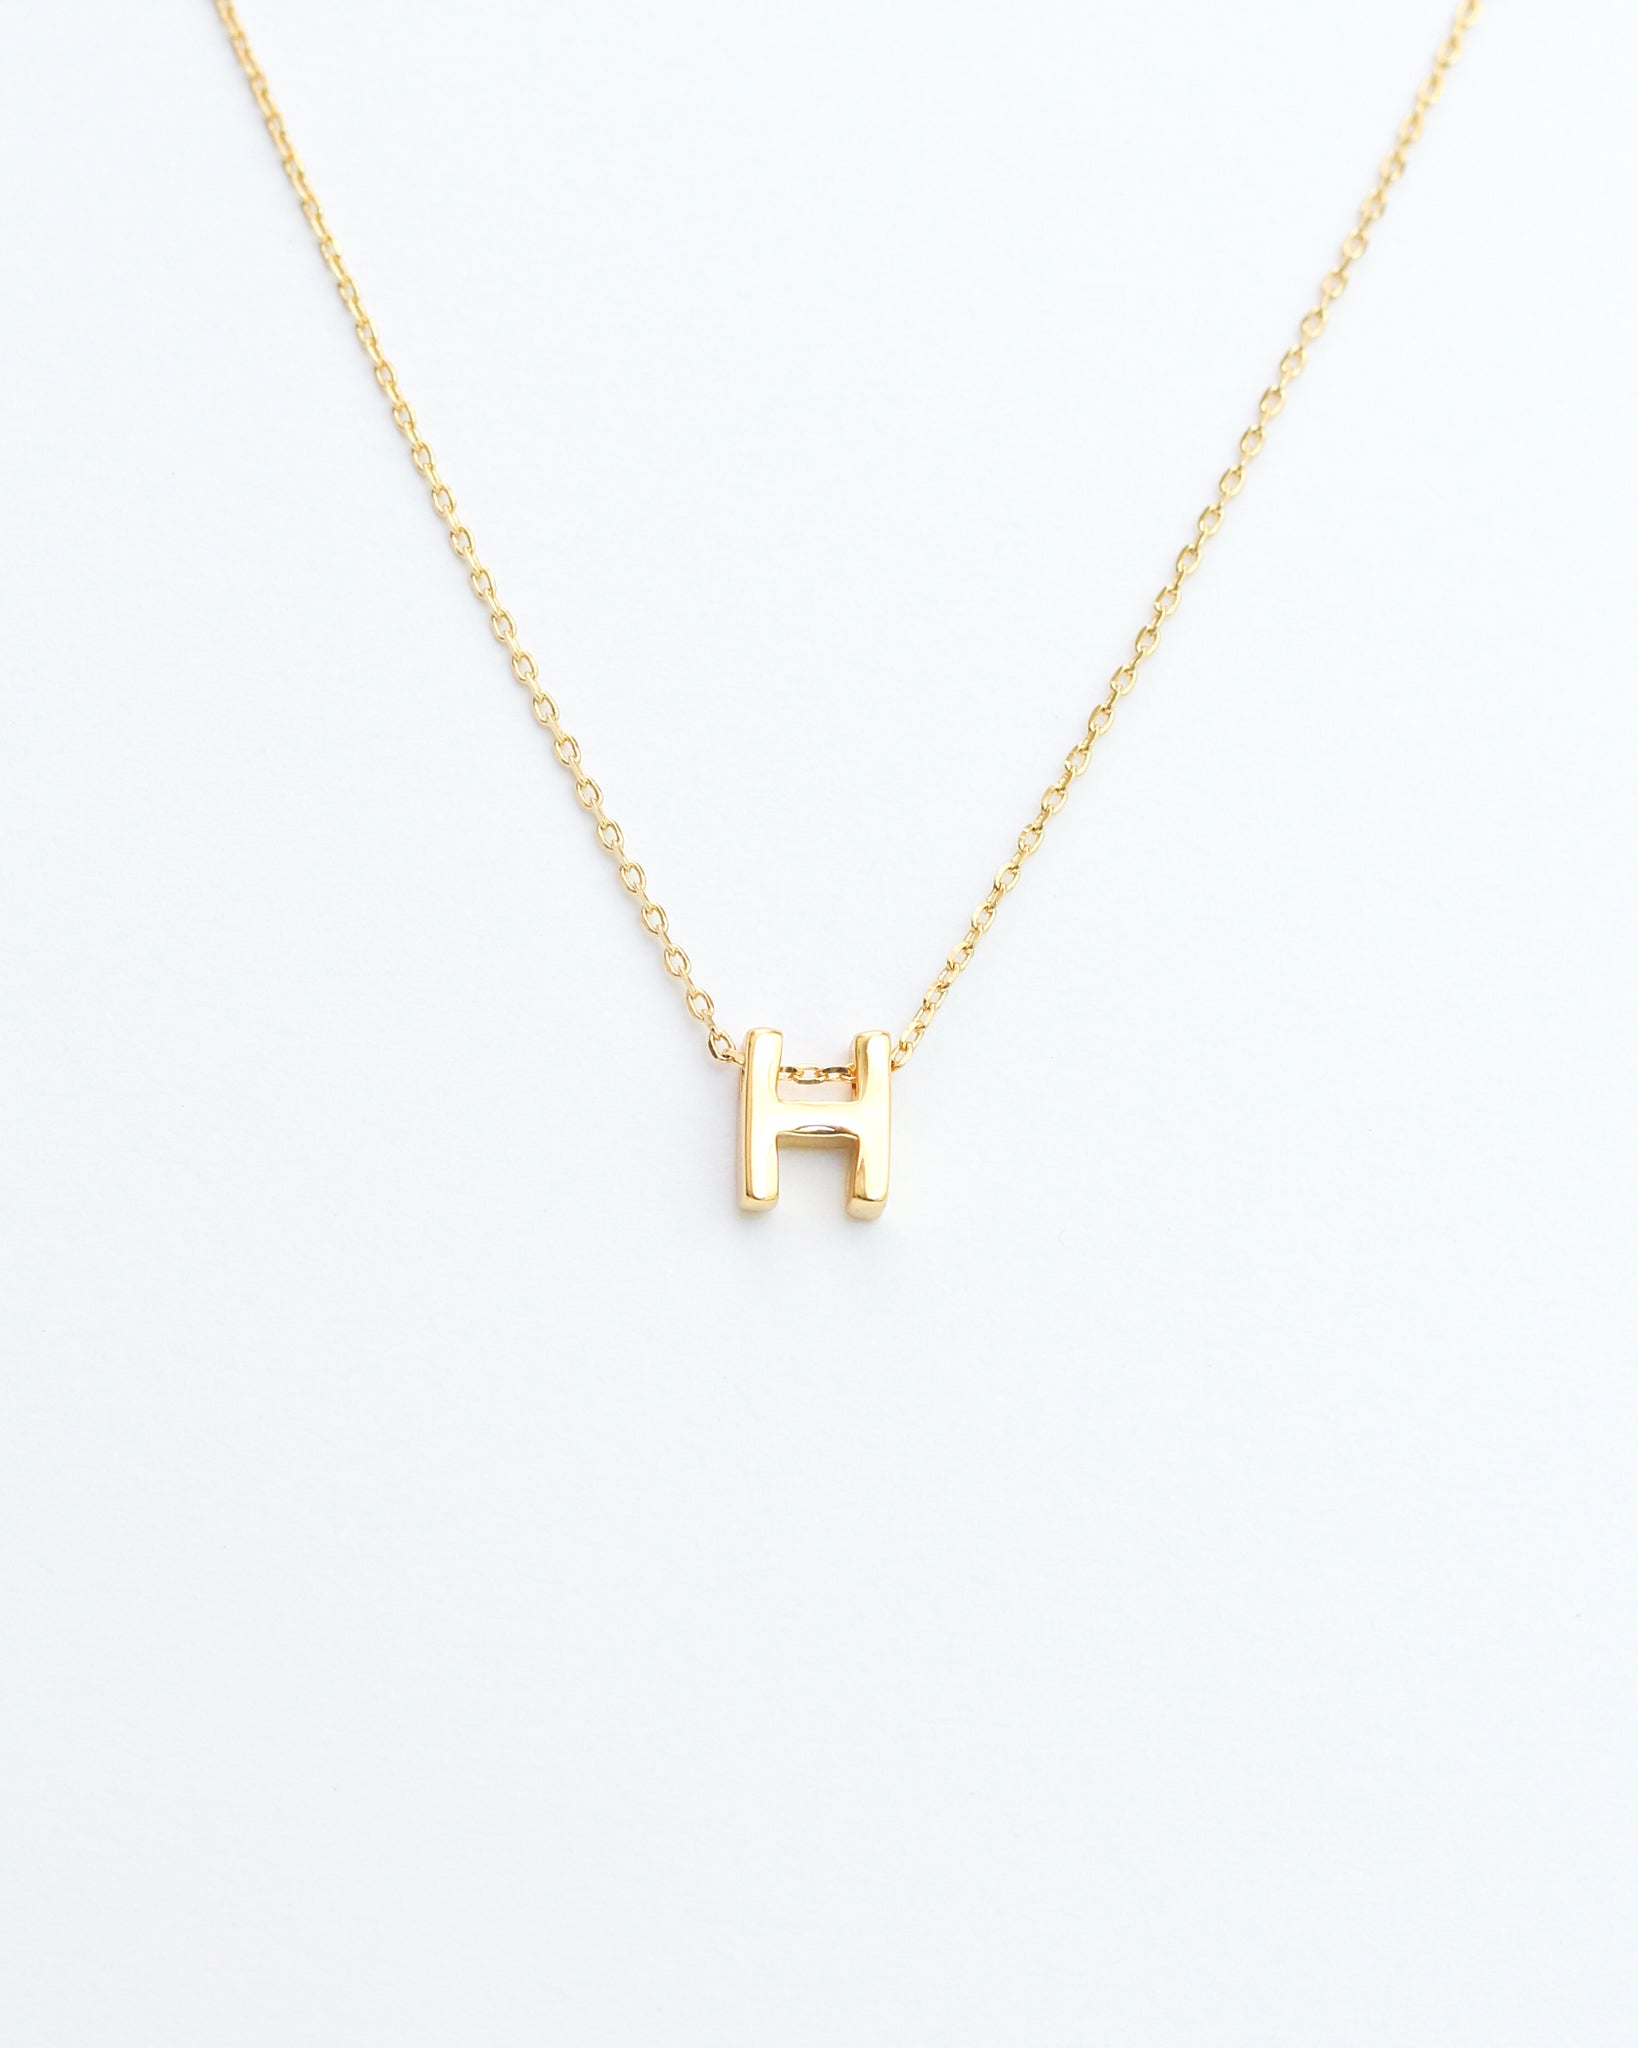 Gold Initial Letter Block Necklace. Letter H necklace